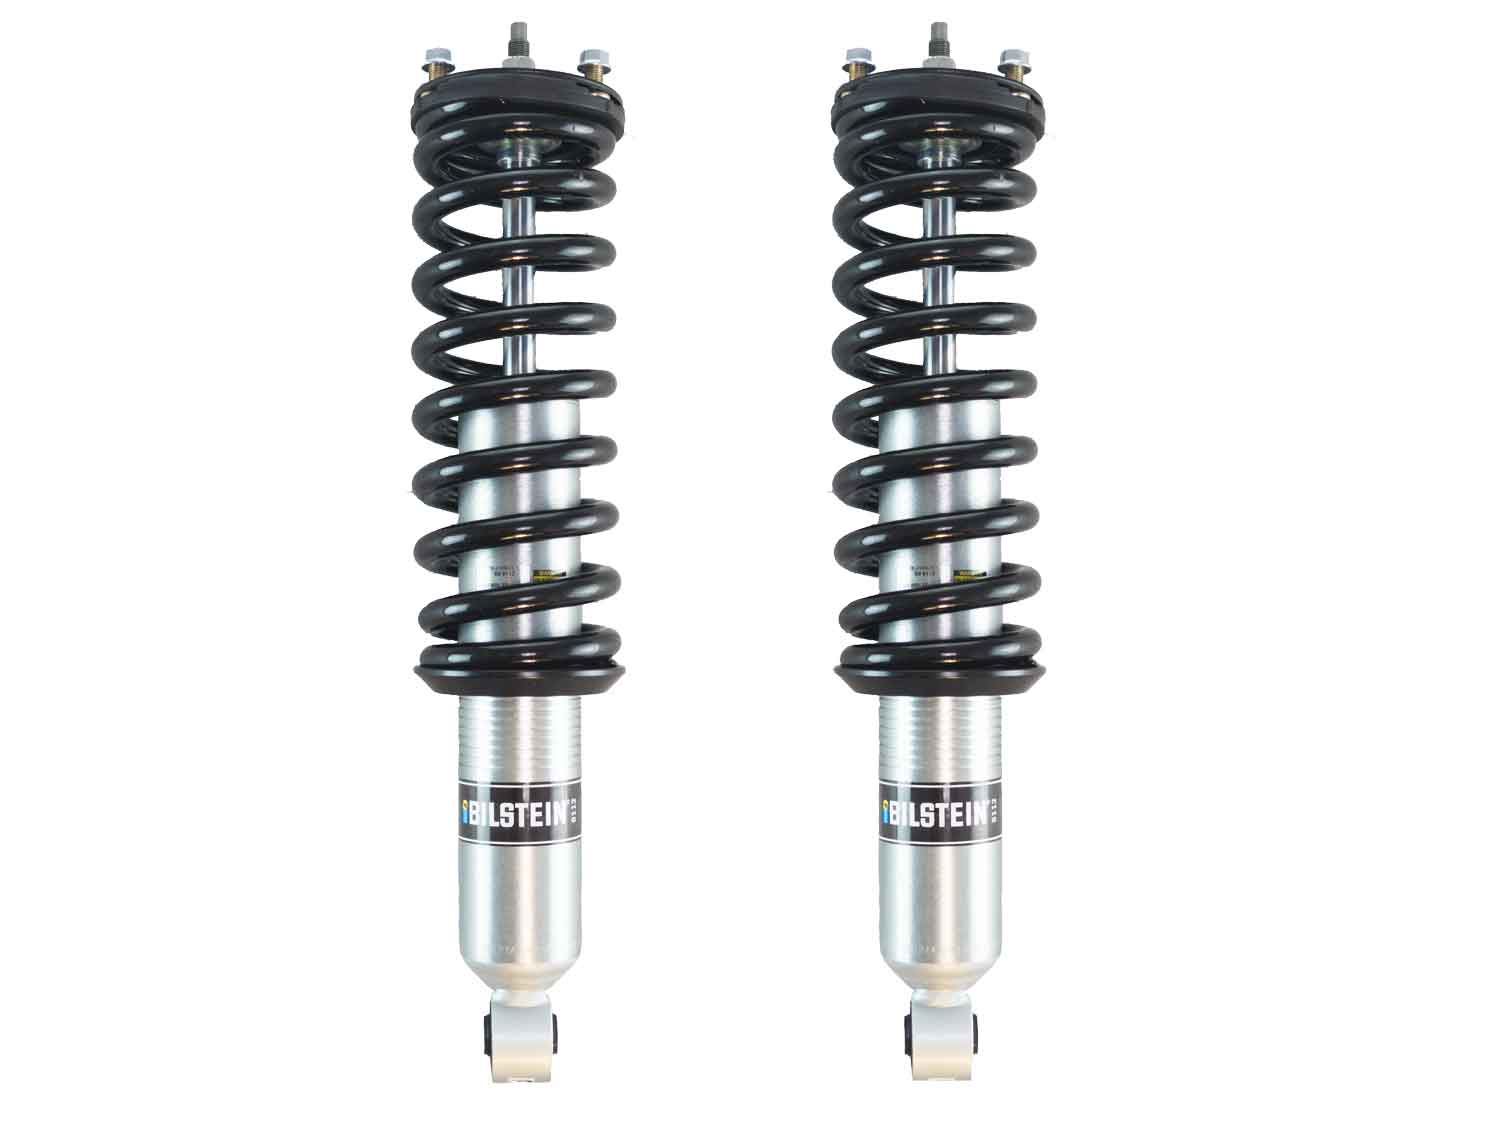 Bilstein 6112 1.9-3.4" Front Assembled Coilovers Kit for 2007-2009 Toyota FJ Cruiser 4WD